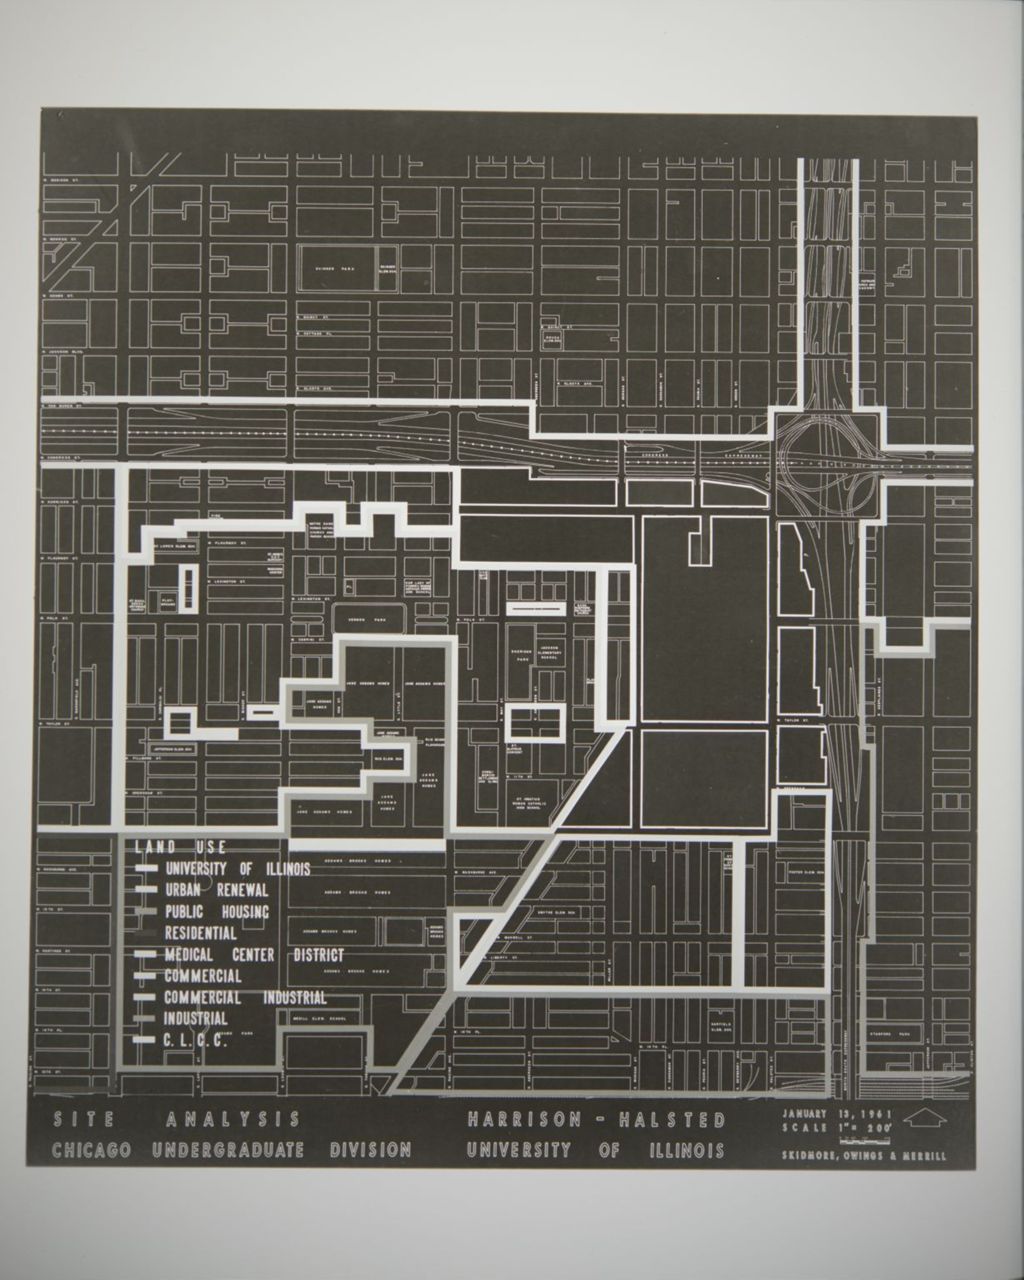 Miniature of Site analysis for the area at Harrison and Halsted by architecture firm Skidmore, Owings, and Merrill